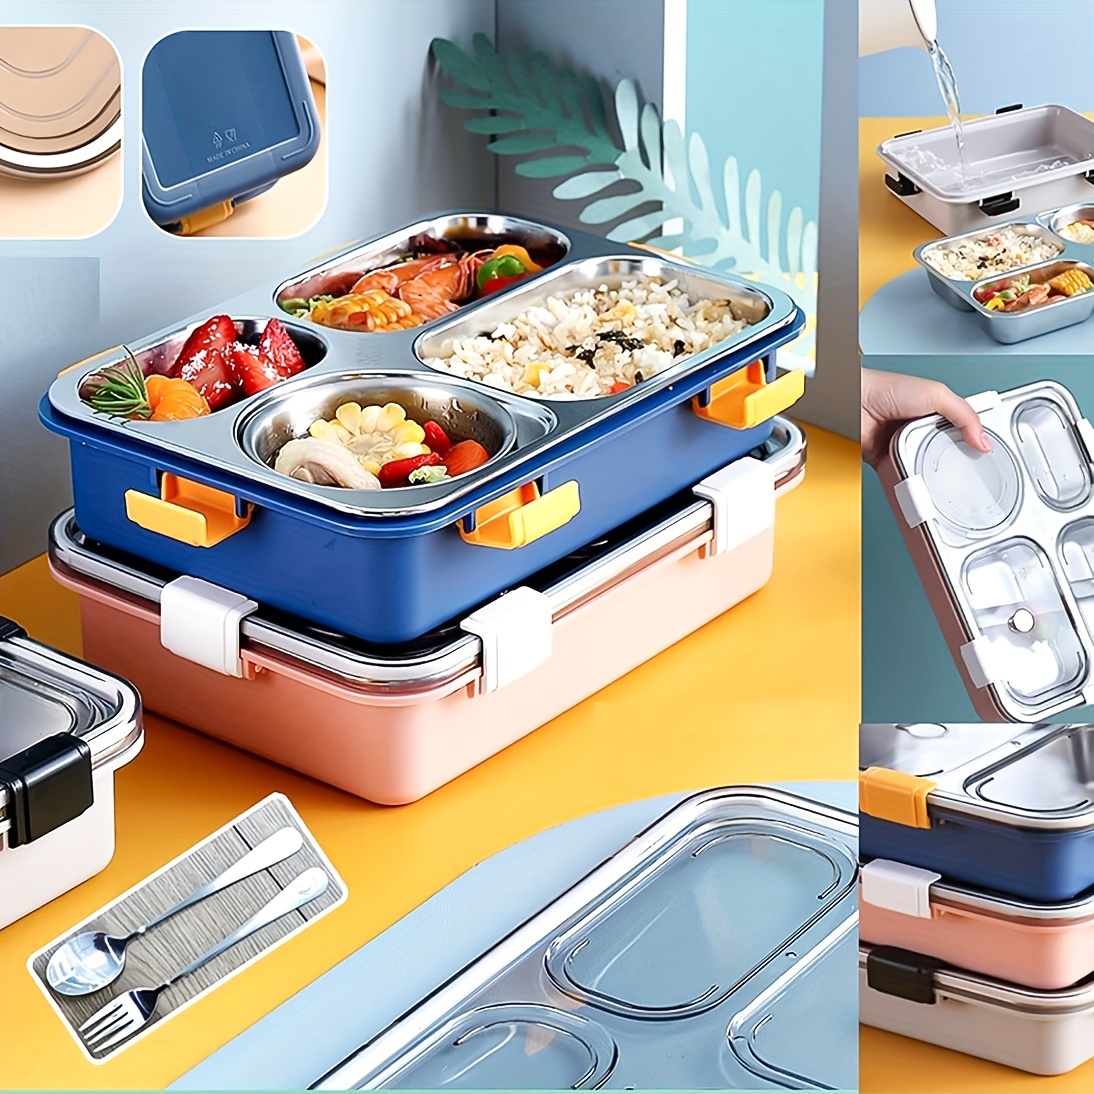 1/4/5pcs 304 Stainless Steel Vacuum Thermal Lunch Box Food Warmer Soup Cup  Insulated Thermos Containers Microwave Oven Lunch Box - AliExpress